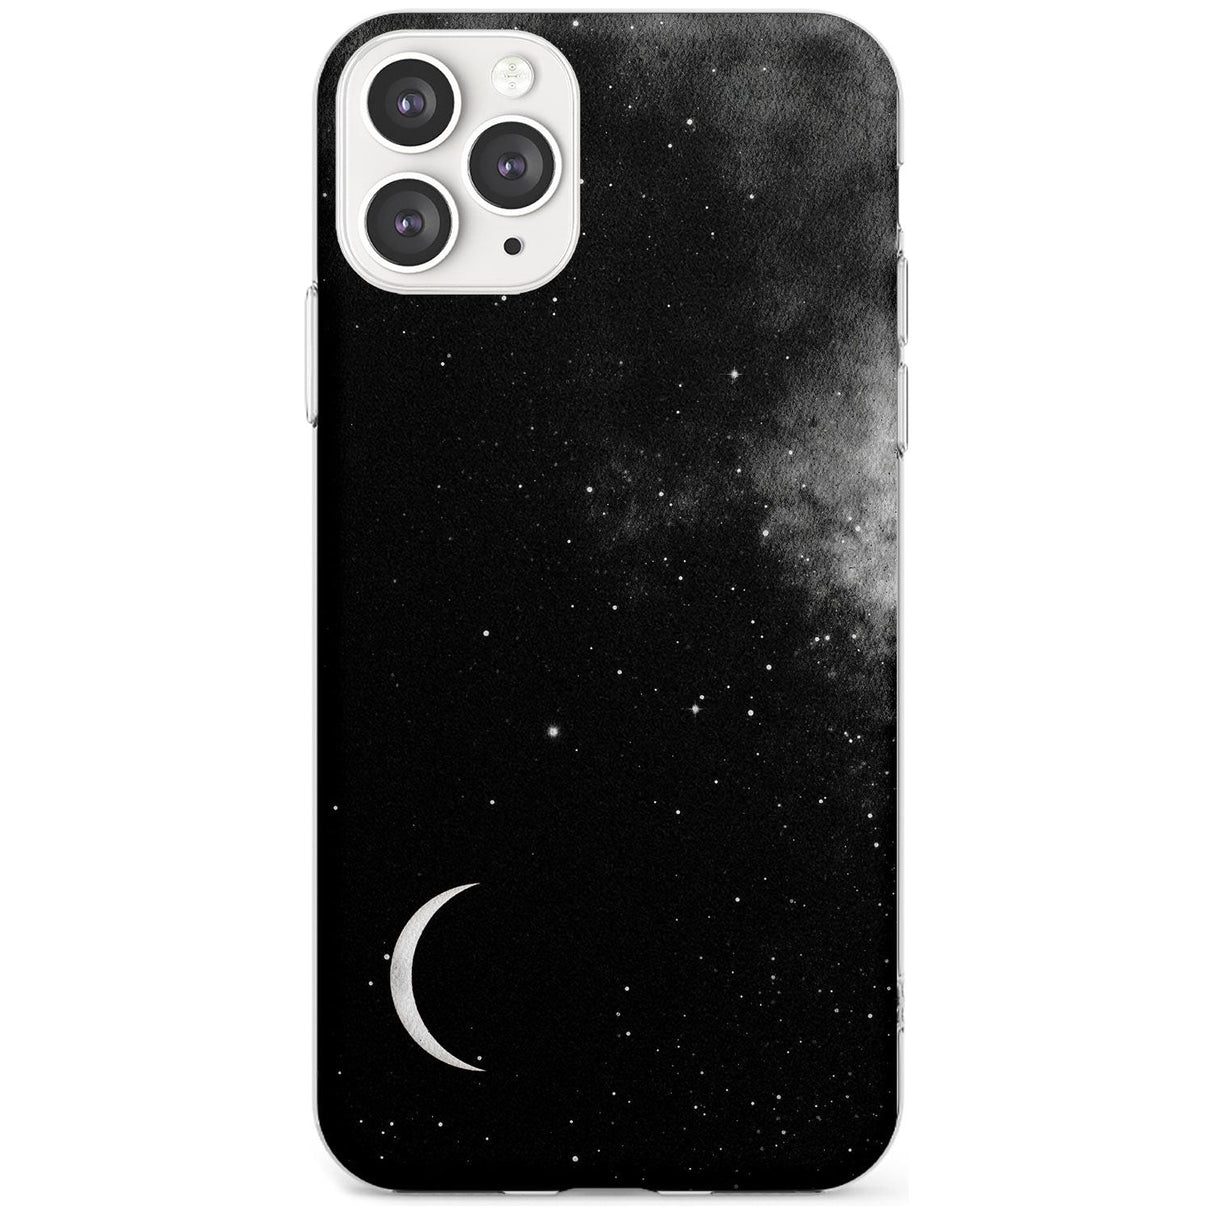 Night Sky Galaxies: Crescent Moon Phone Case iPhone 11 Pro Max / Clear Case,iPhone 11 Pro / Clear Case,iPhone 12 Pro Max / Clear Case,iPhone 12 Pro / Clear Case Blanc Space